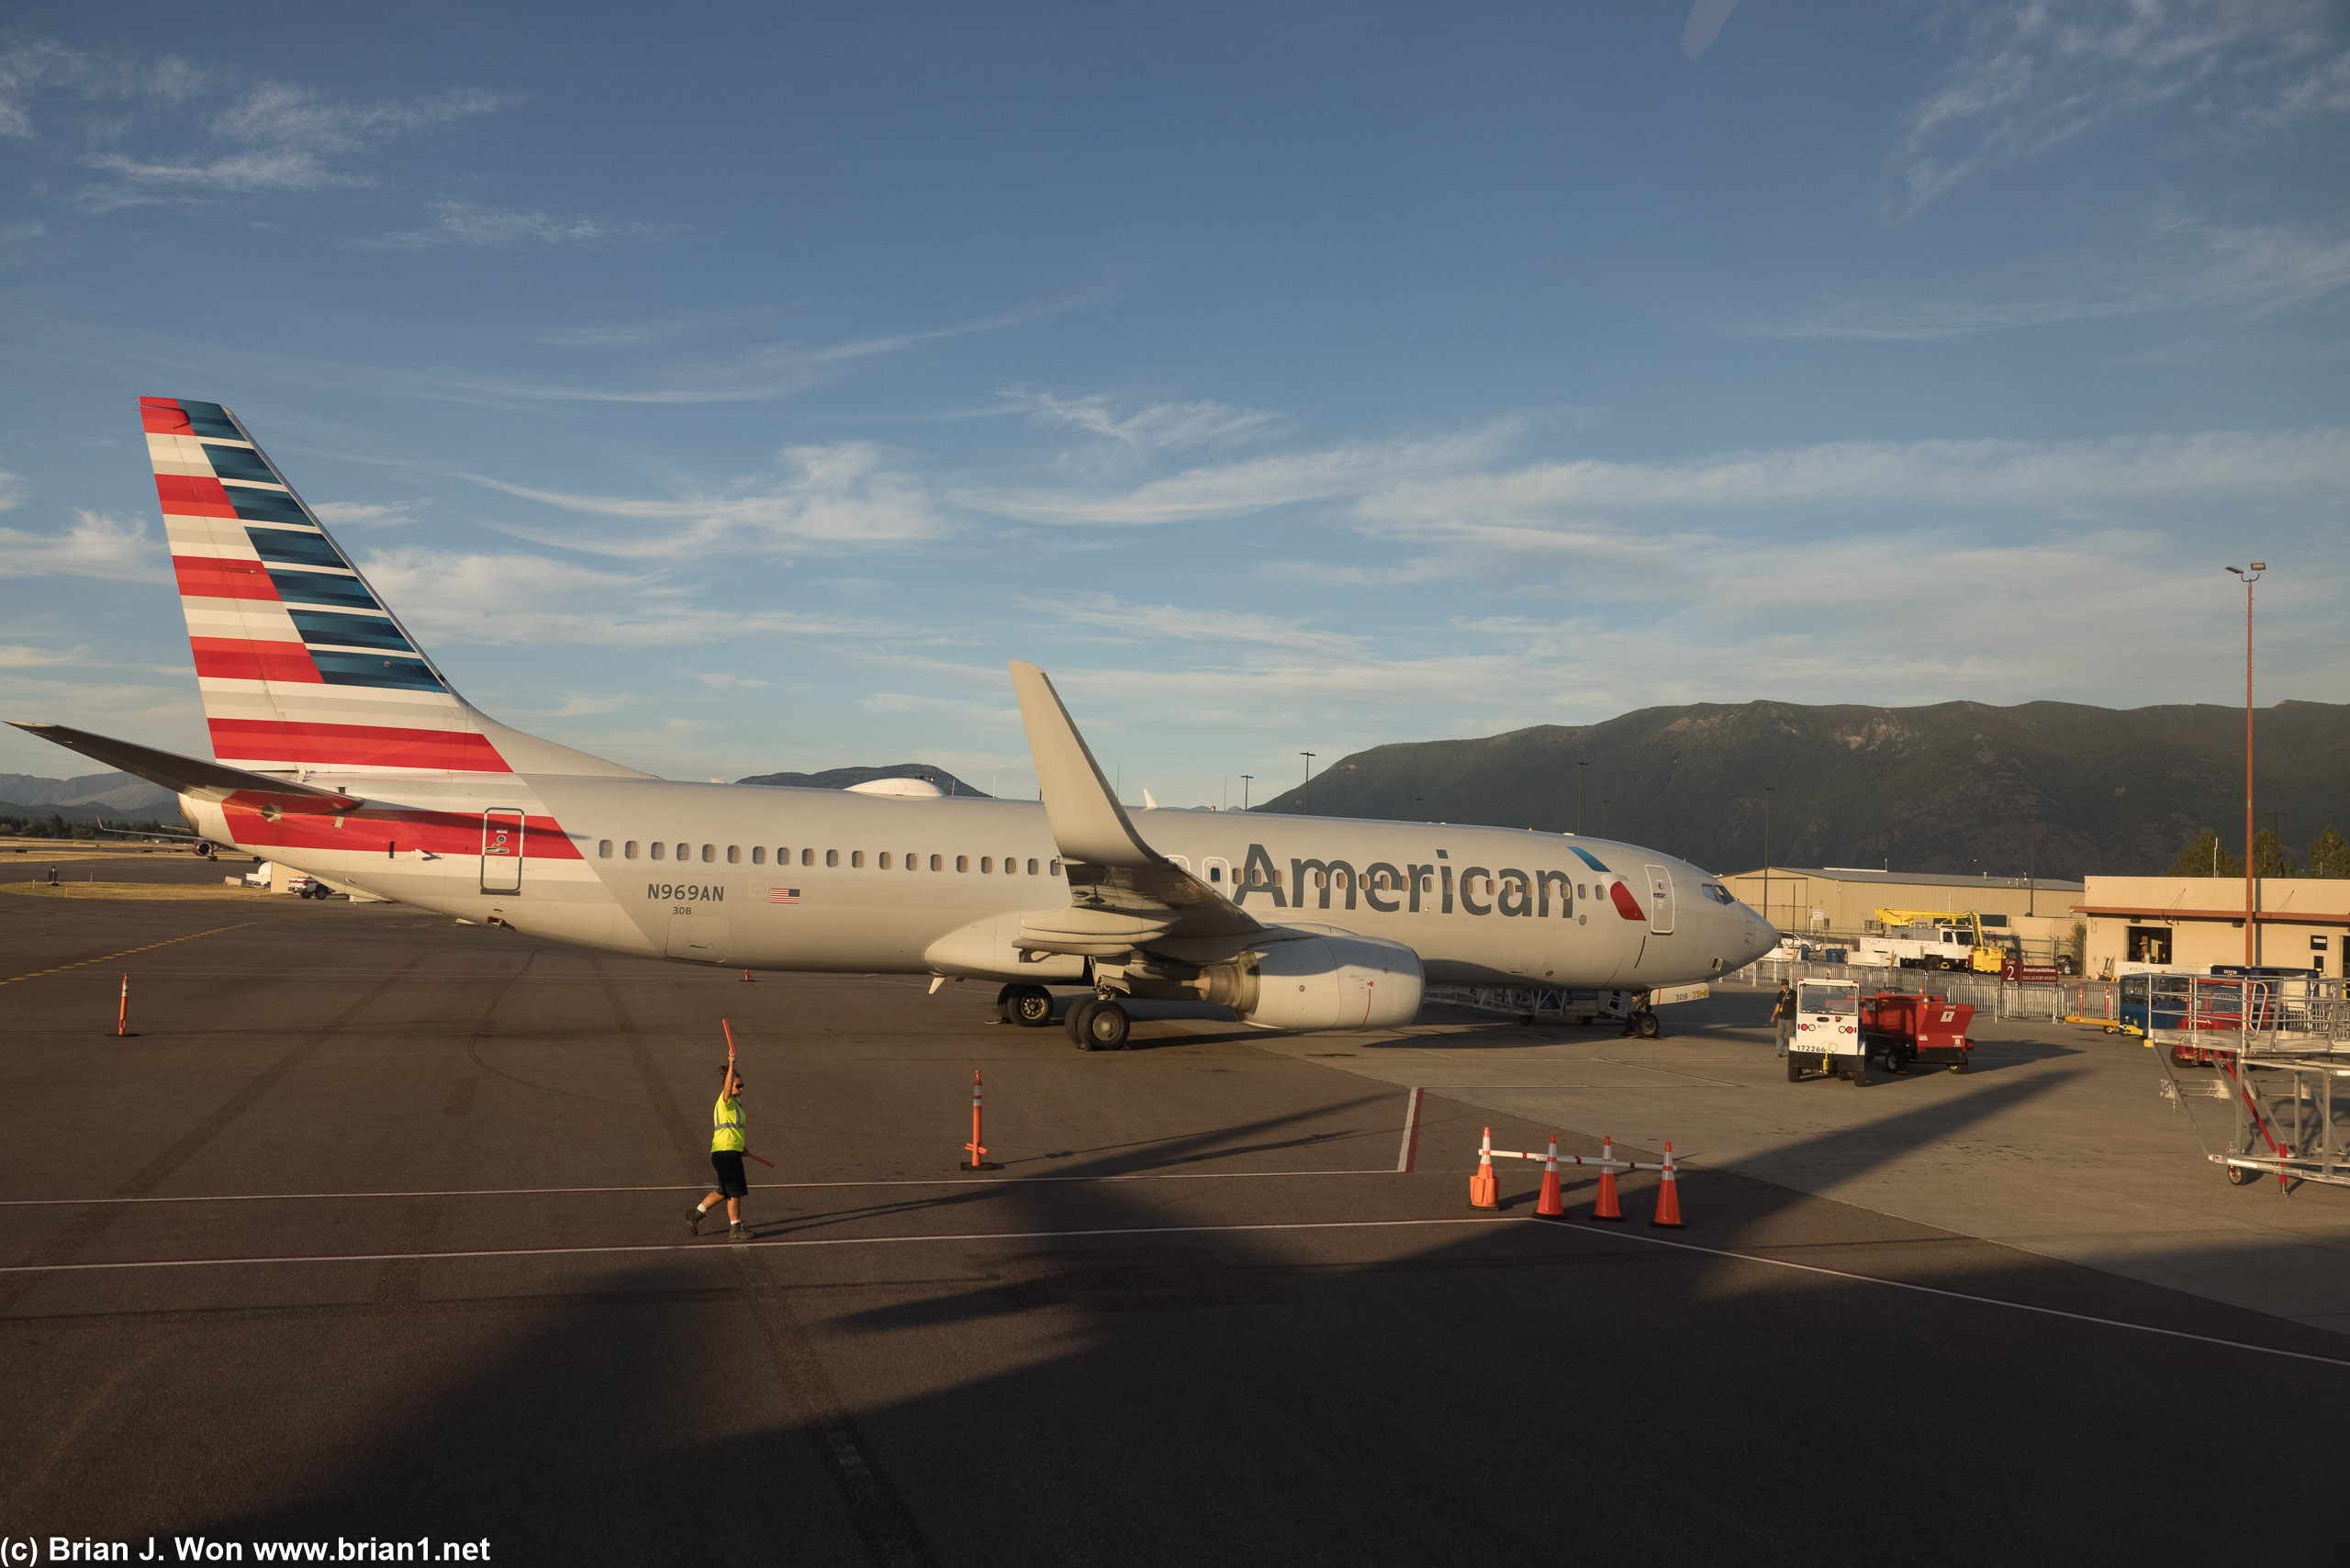 American Airlines 737-800 also at FCA.